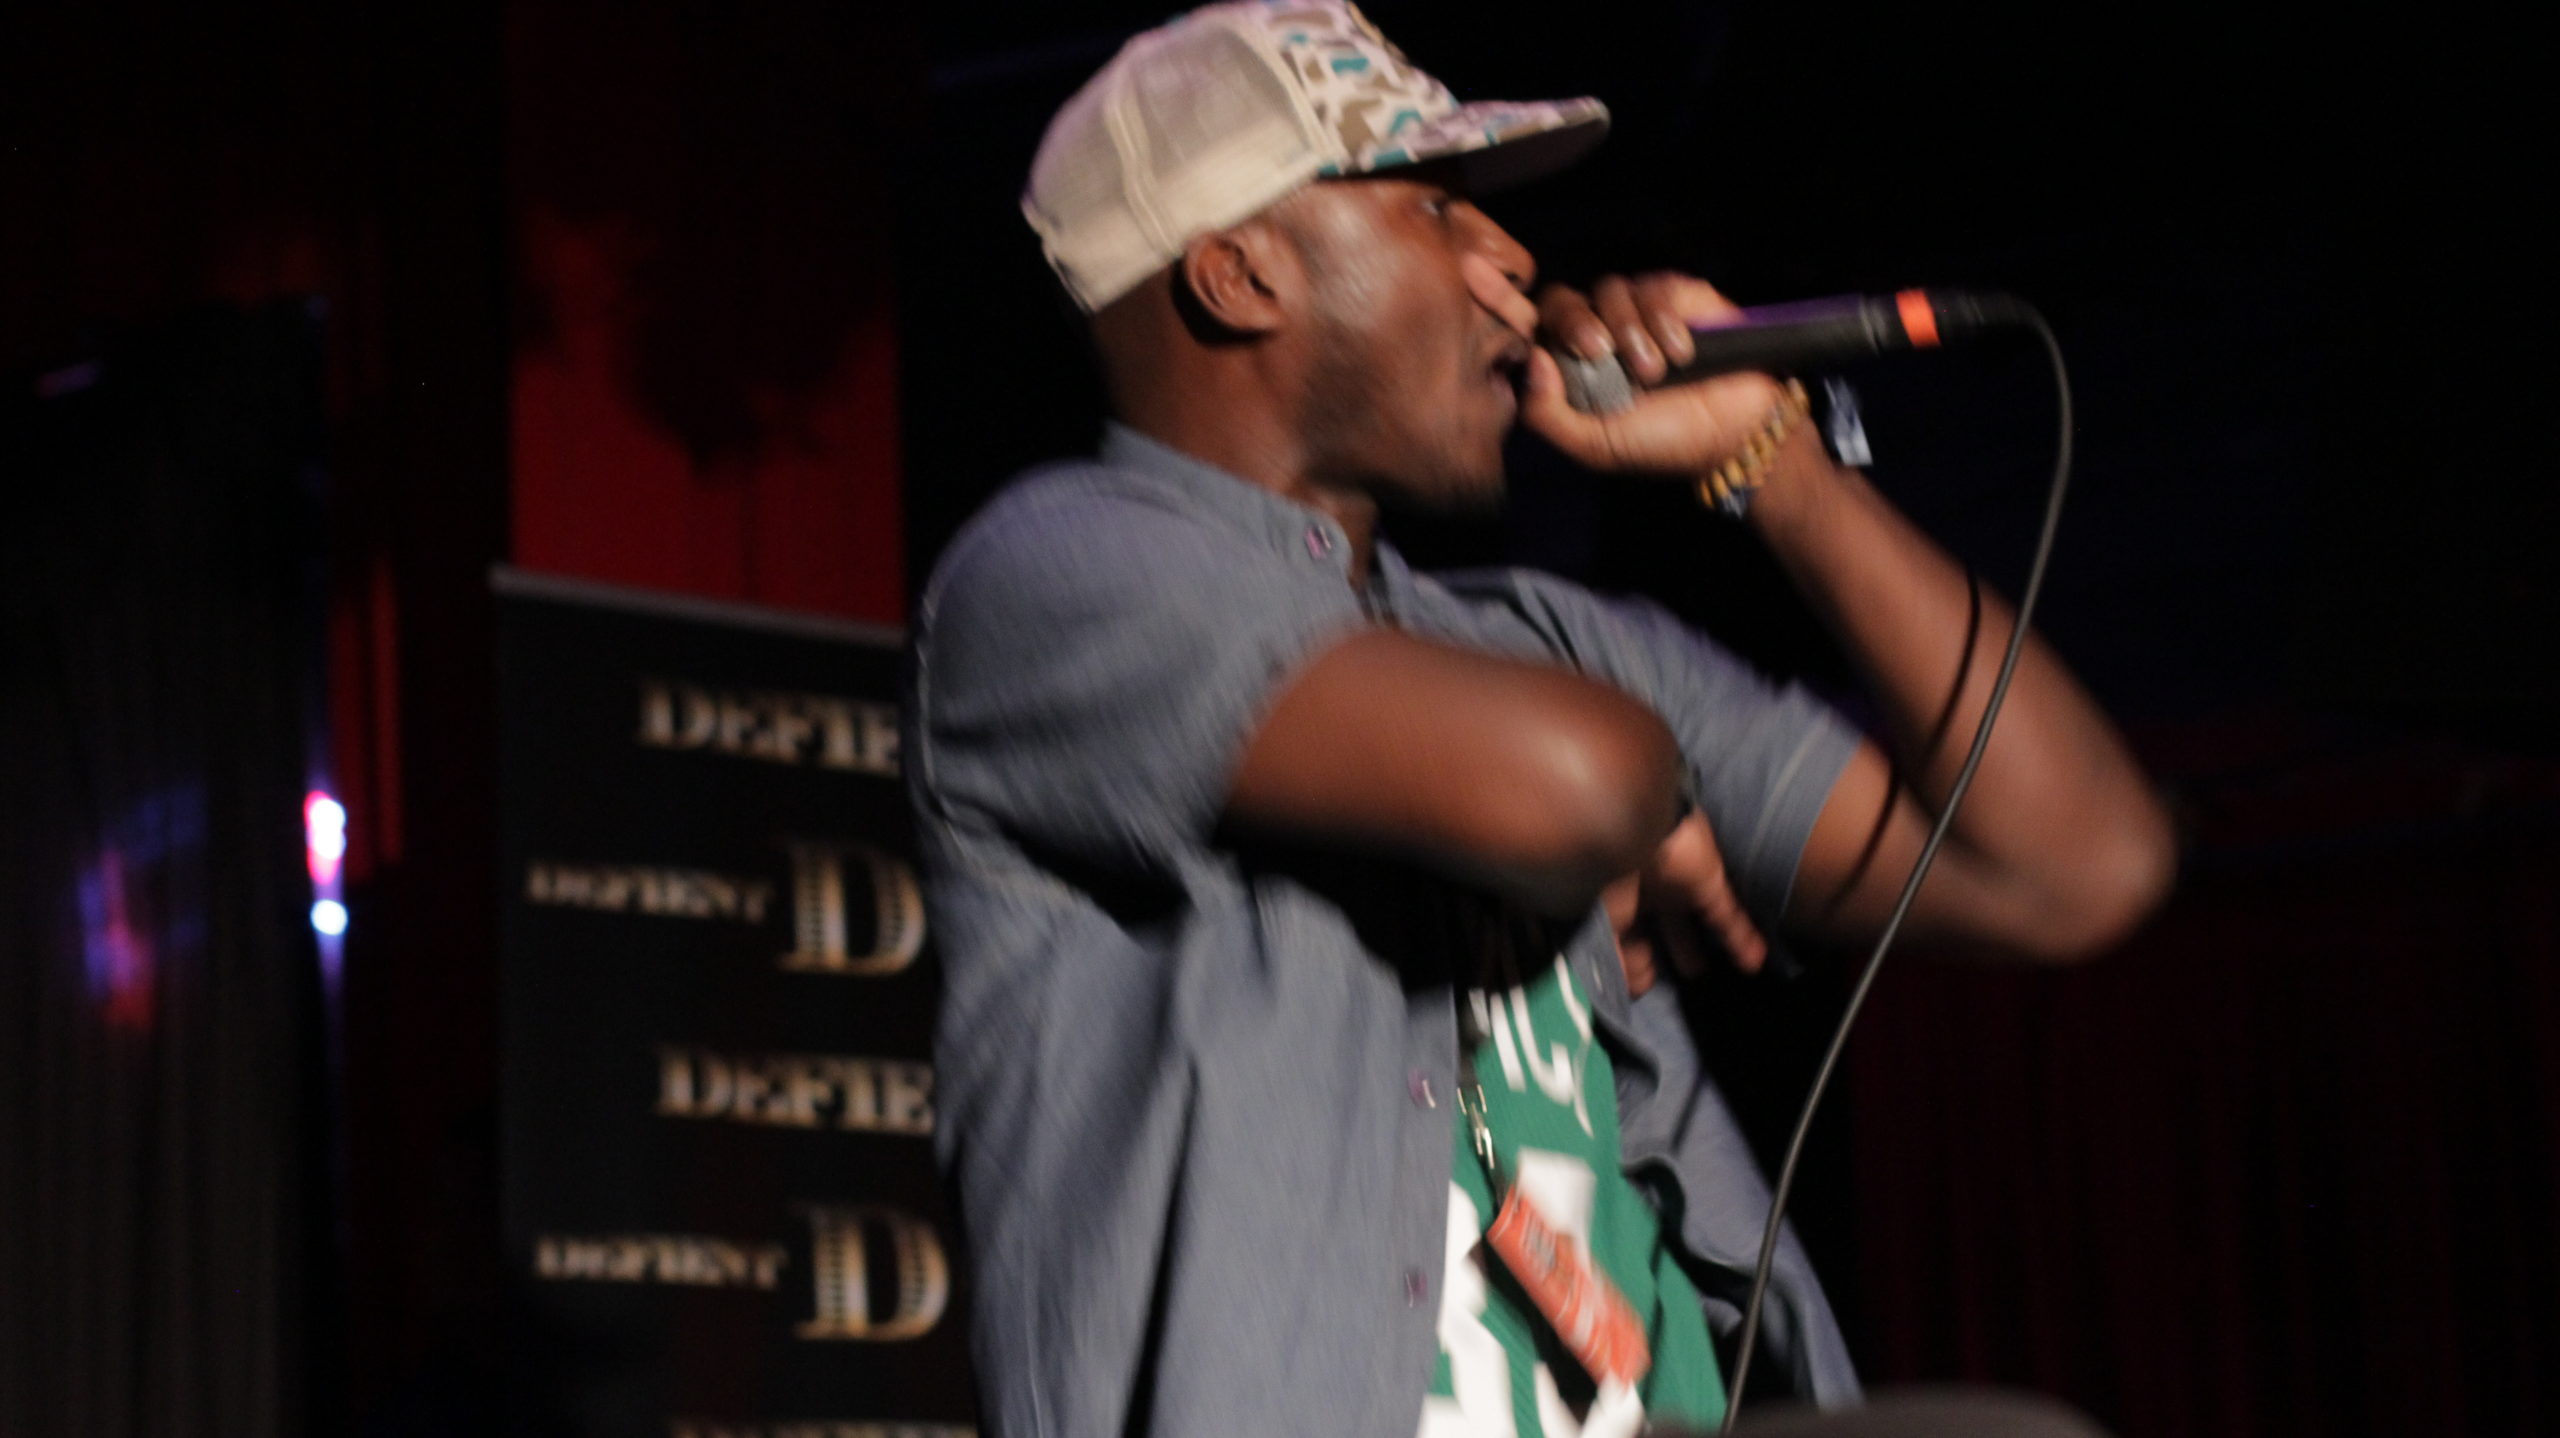 Indiana Rome Performs at A3C Hip Hop Festival (Video)